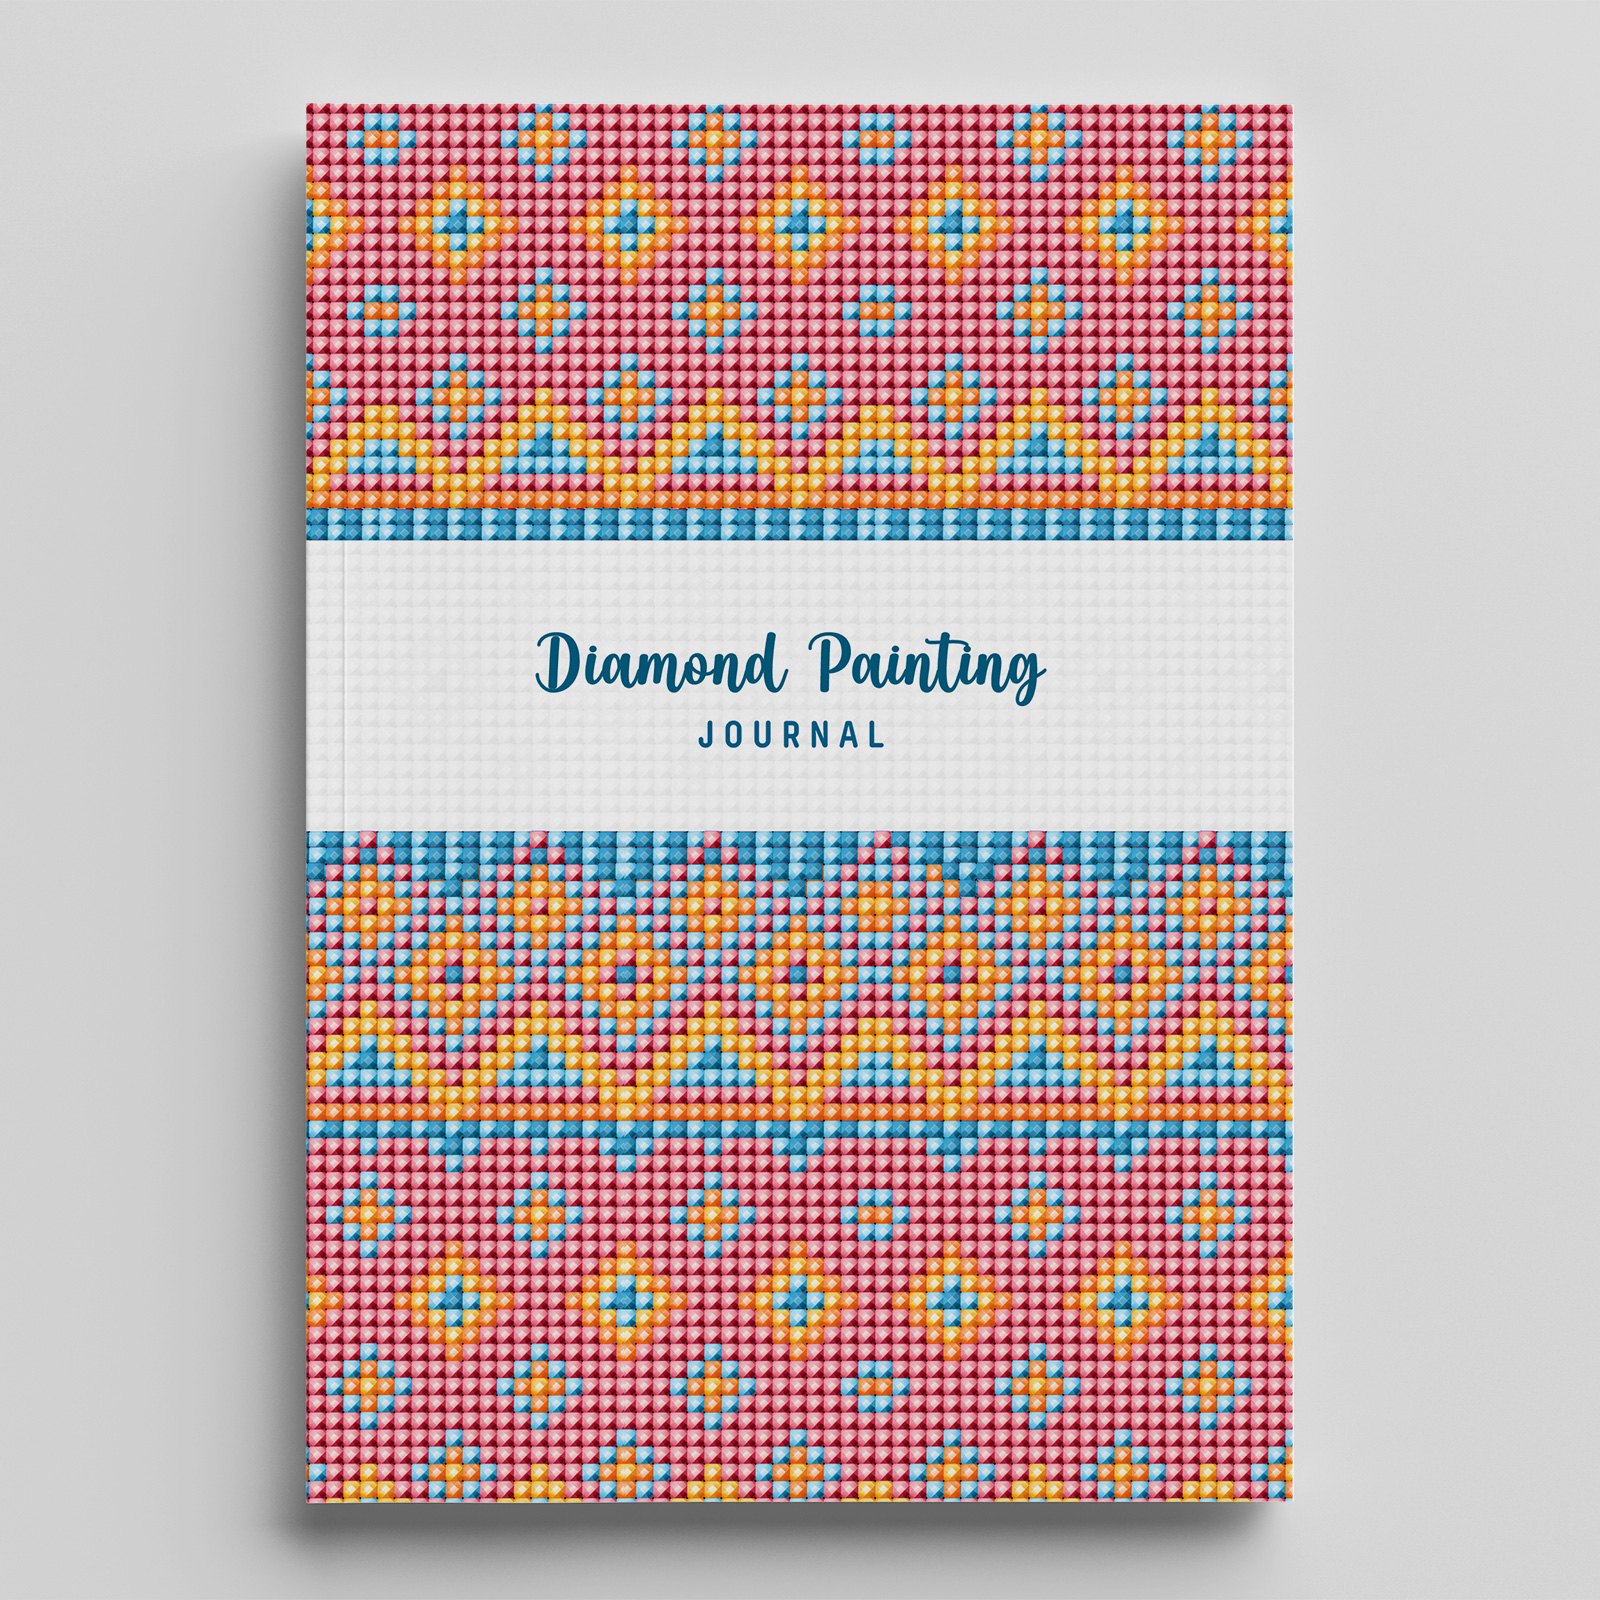 Diamond Painting Log Book: Journal And Notebook To Track Diamond Painting  Projects